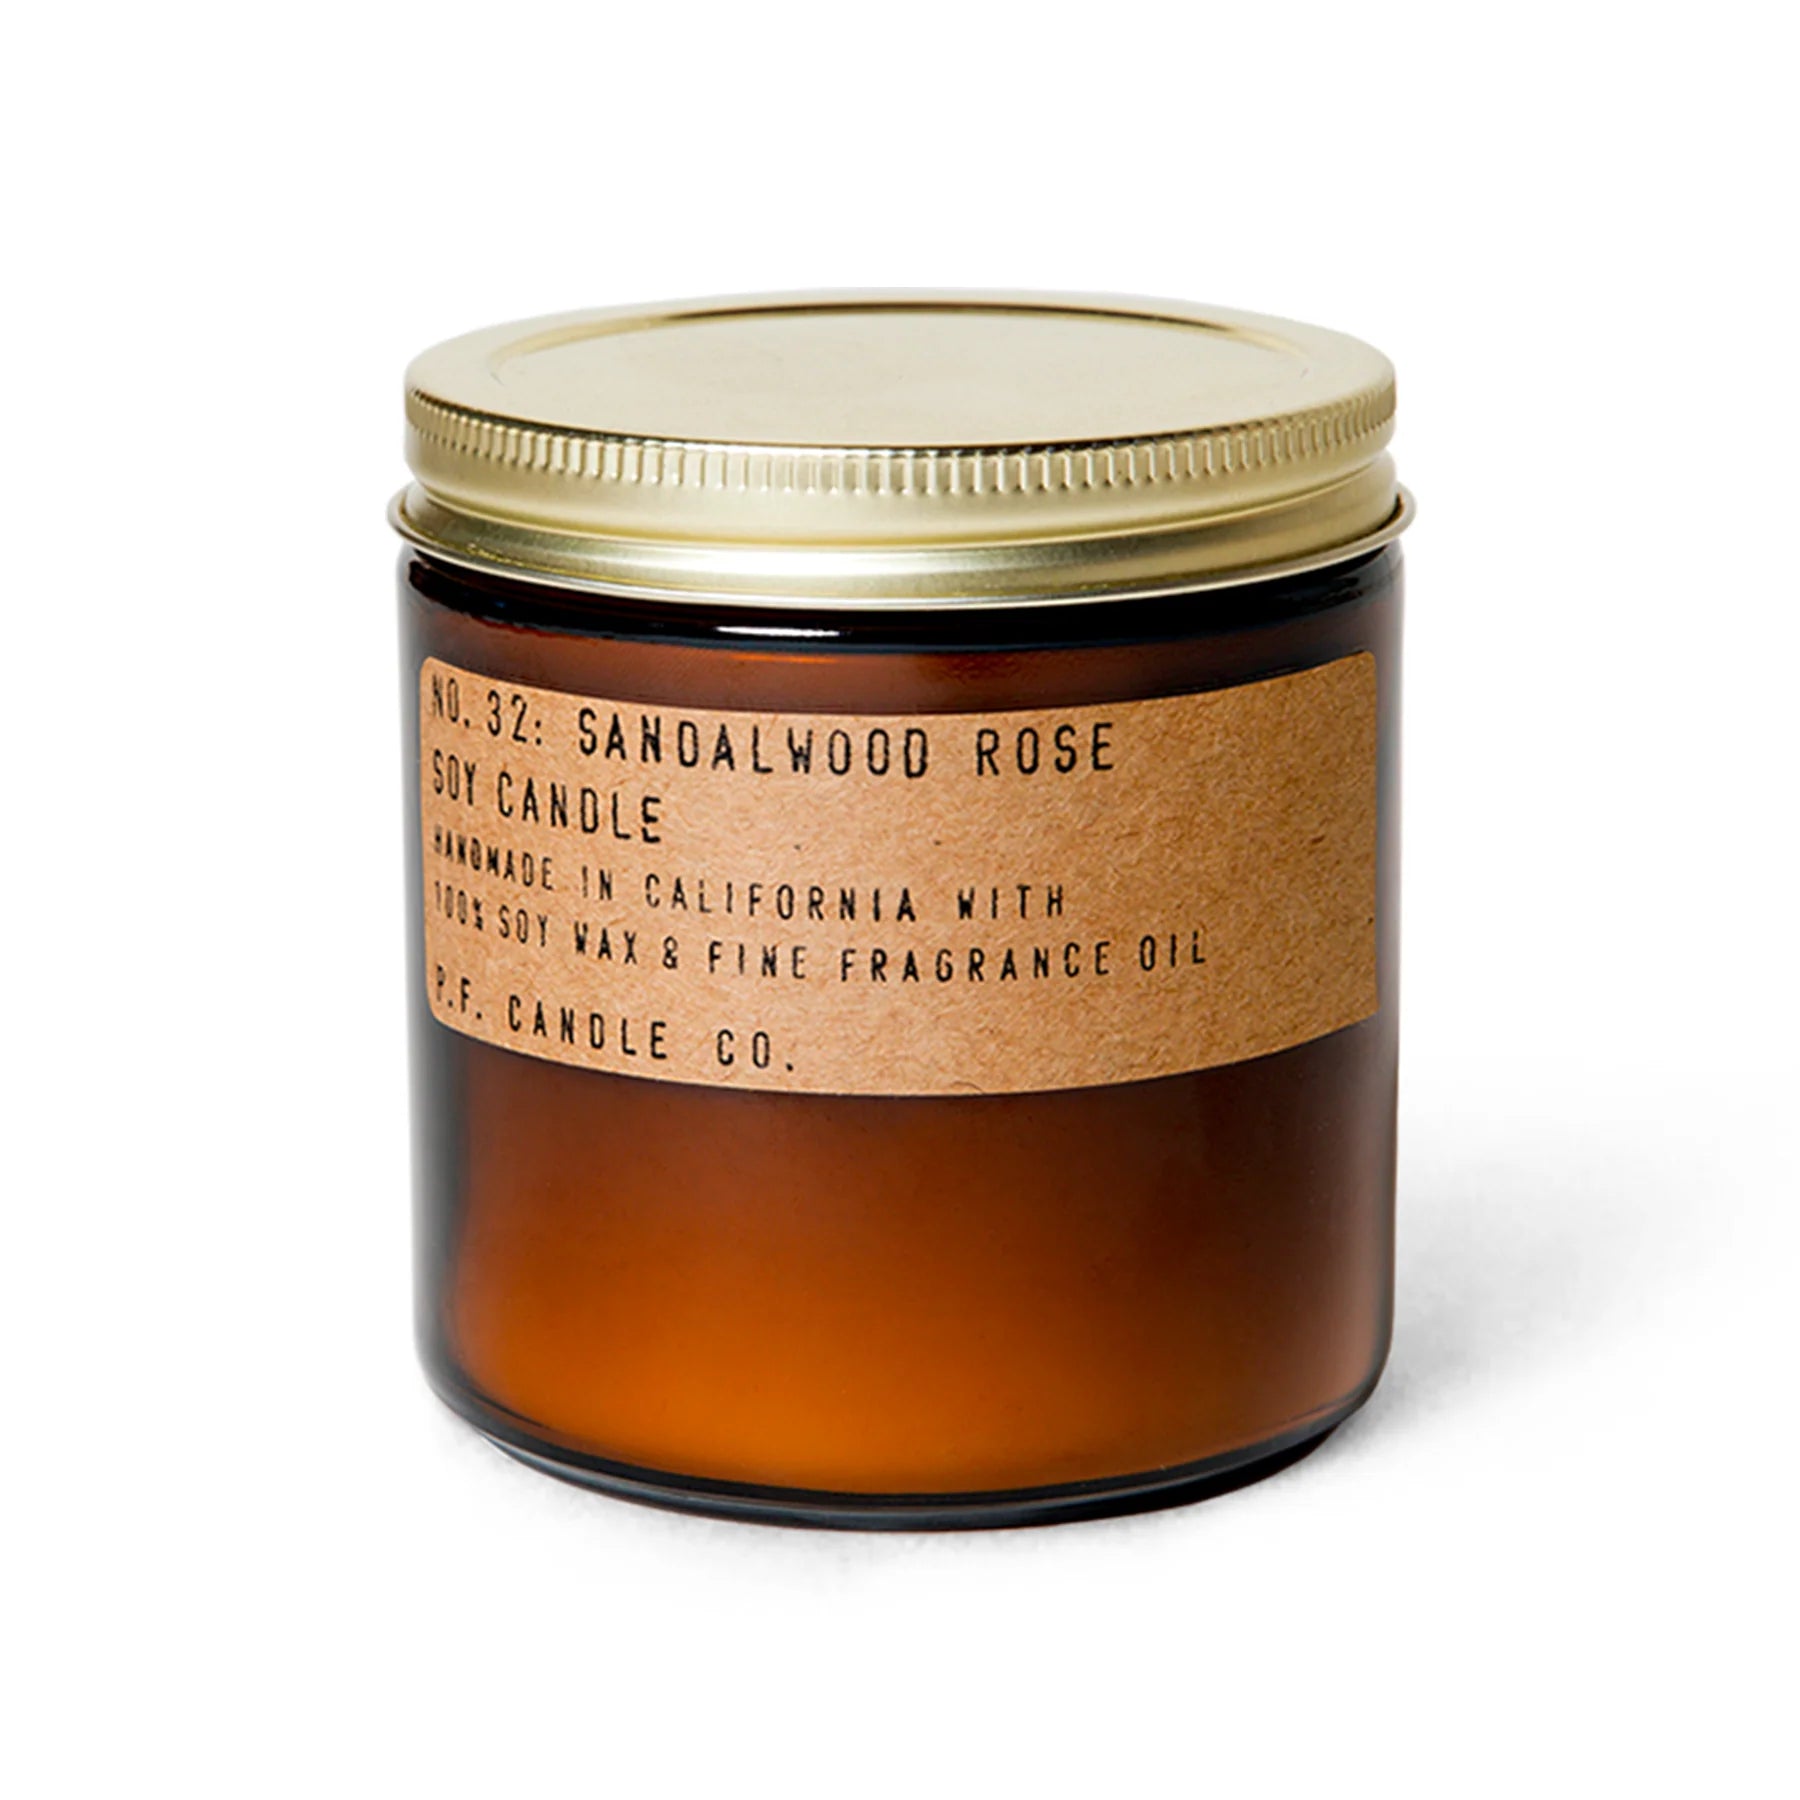 PF Candle Co. Grande bougie